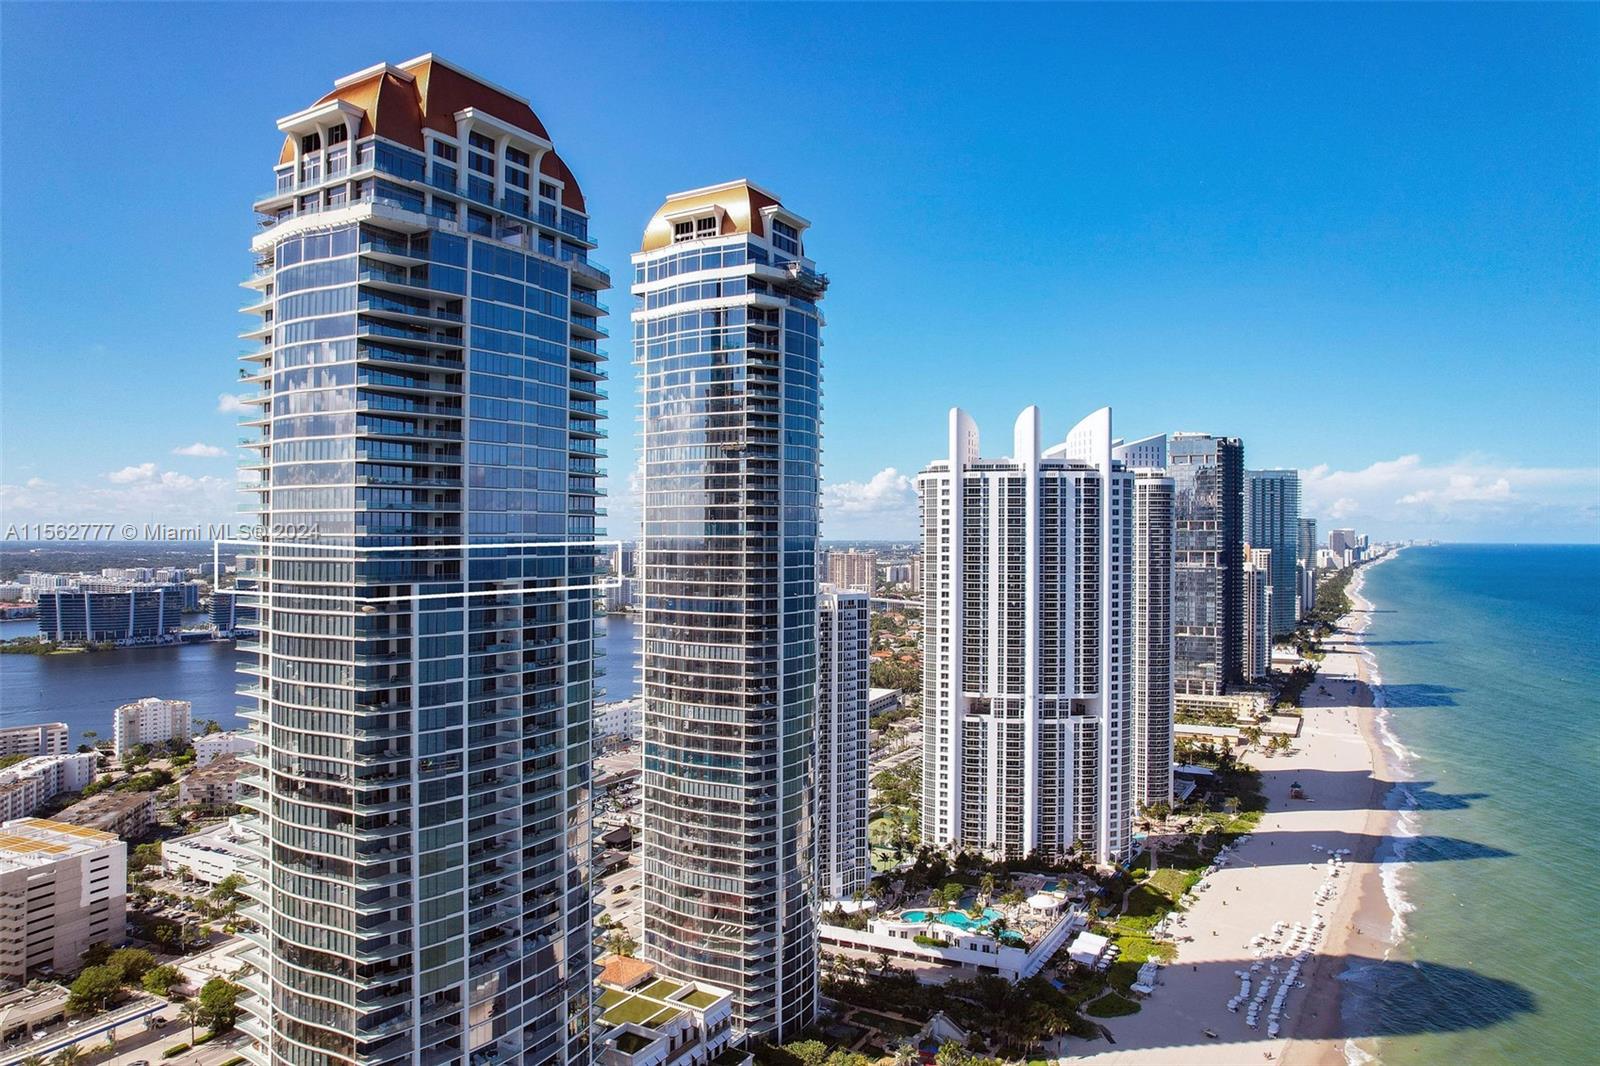 The TS3405/07 custom one-of-a-kind unit is a masterpiece of opulence on the 34th floor of the ultraluxurious & secure Estates at Acqualina in Sunny Isles Beach with endless ocean views. Boasting 7 generously appointed bedrooms & 9.5 lavishly designed onyx & marble bathrooms, meticulously crafted to cater to those who seek the pinnacle of coastal oceanfront living in a floor plan designed to ensure utmost privacy & comfort. Primary Suite encompasses the bedroom, substantial bathroom inc 2 showers, 2 lavatories, dry sauna, her closet w ocean views, his closet, sound-insulated music room & an office, both opening onto large ocean-front-facing terrace. Bonus rooms are a media room and an exercise room which can also be utilized as a play room. A must see and easy to show.